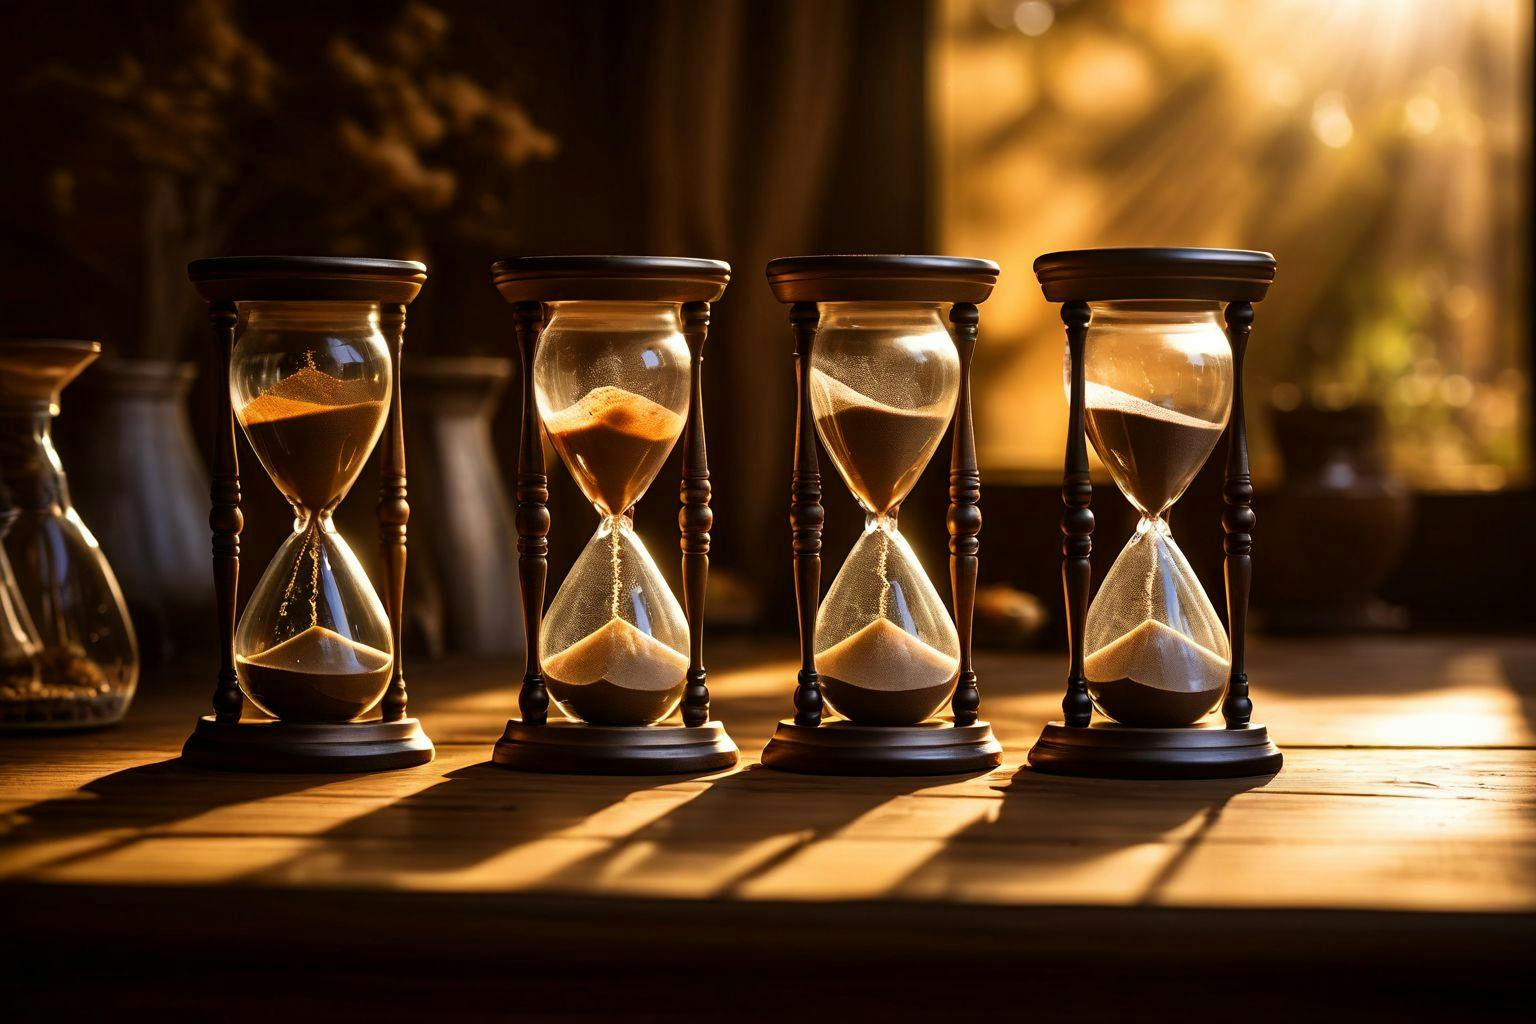 A sequence of hourglasses with sand flowing, on a wooden table, depicting the concept of timing, in a warm indoor setting, Photographic, with soft light highlighting the sand's movement.